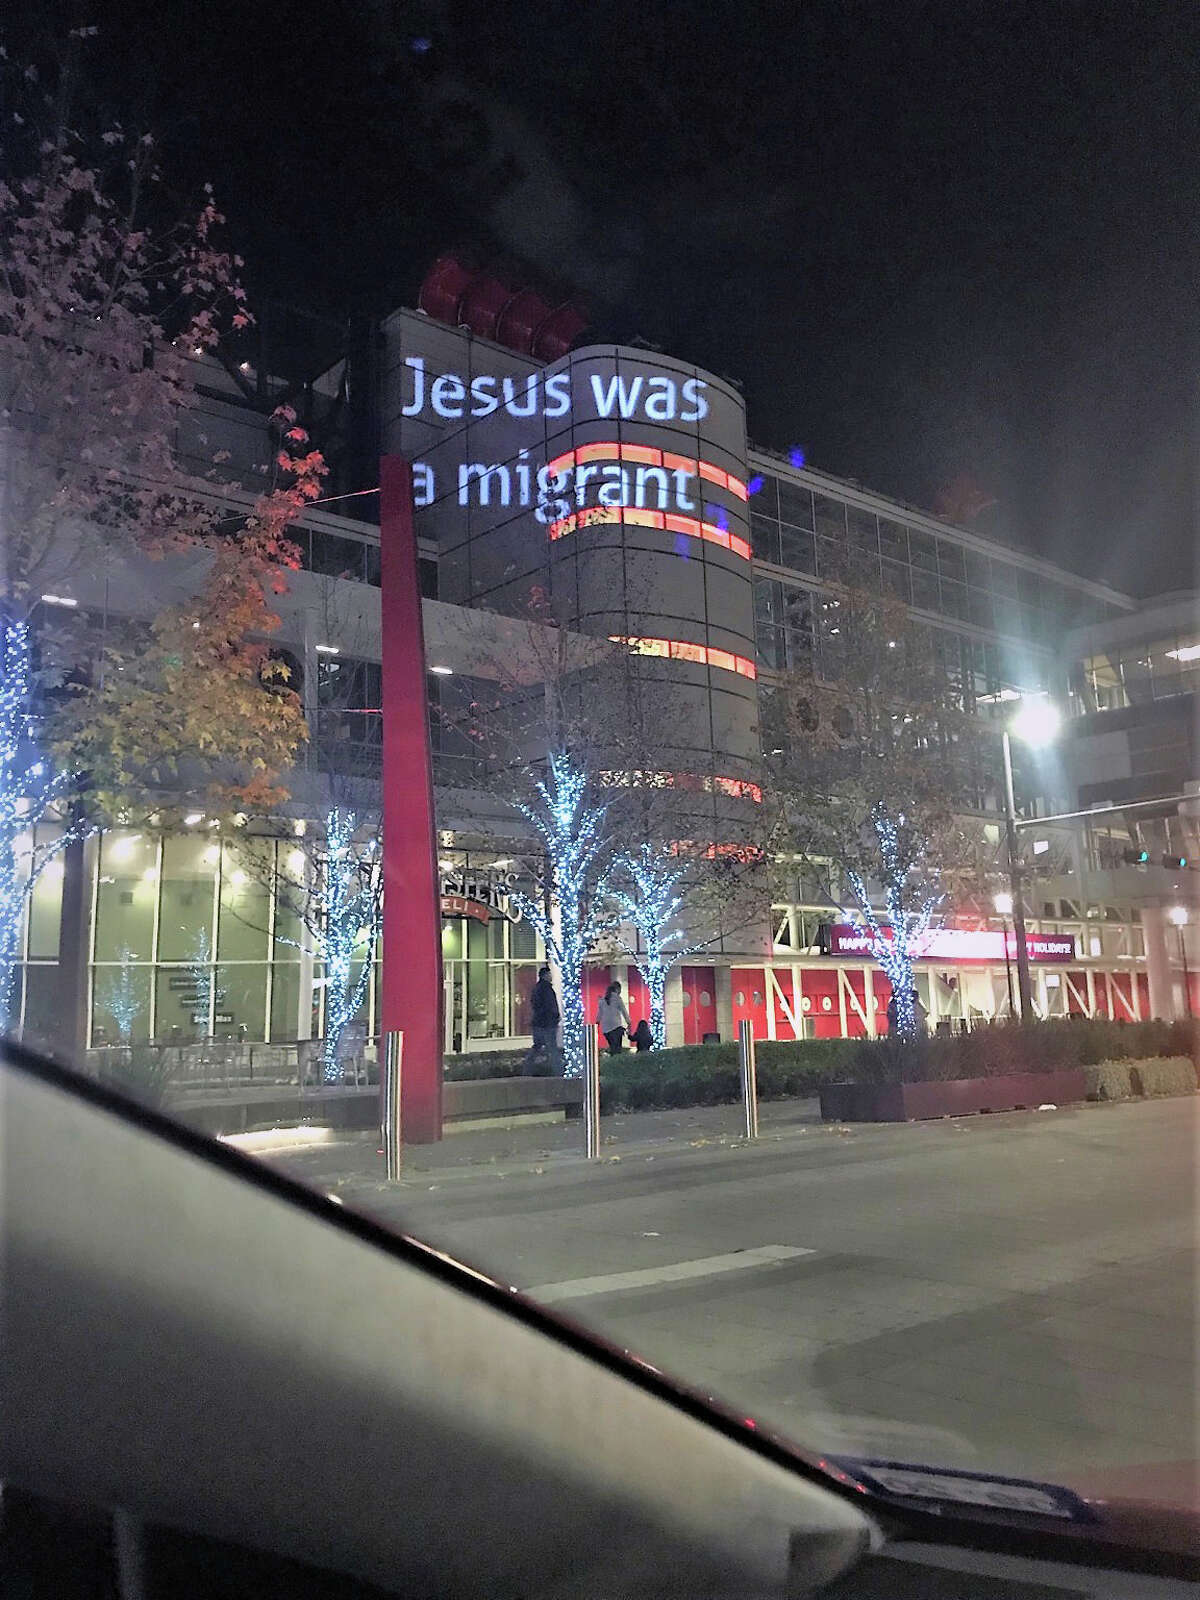 Indivisible Houston projects the message "Jesus was a migrant" on an exterior wall at the George R. Brown Convention Center.